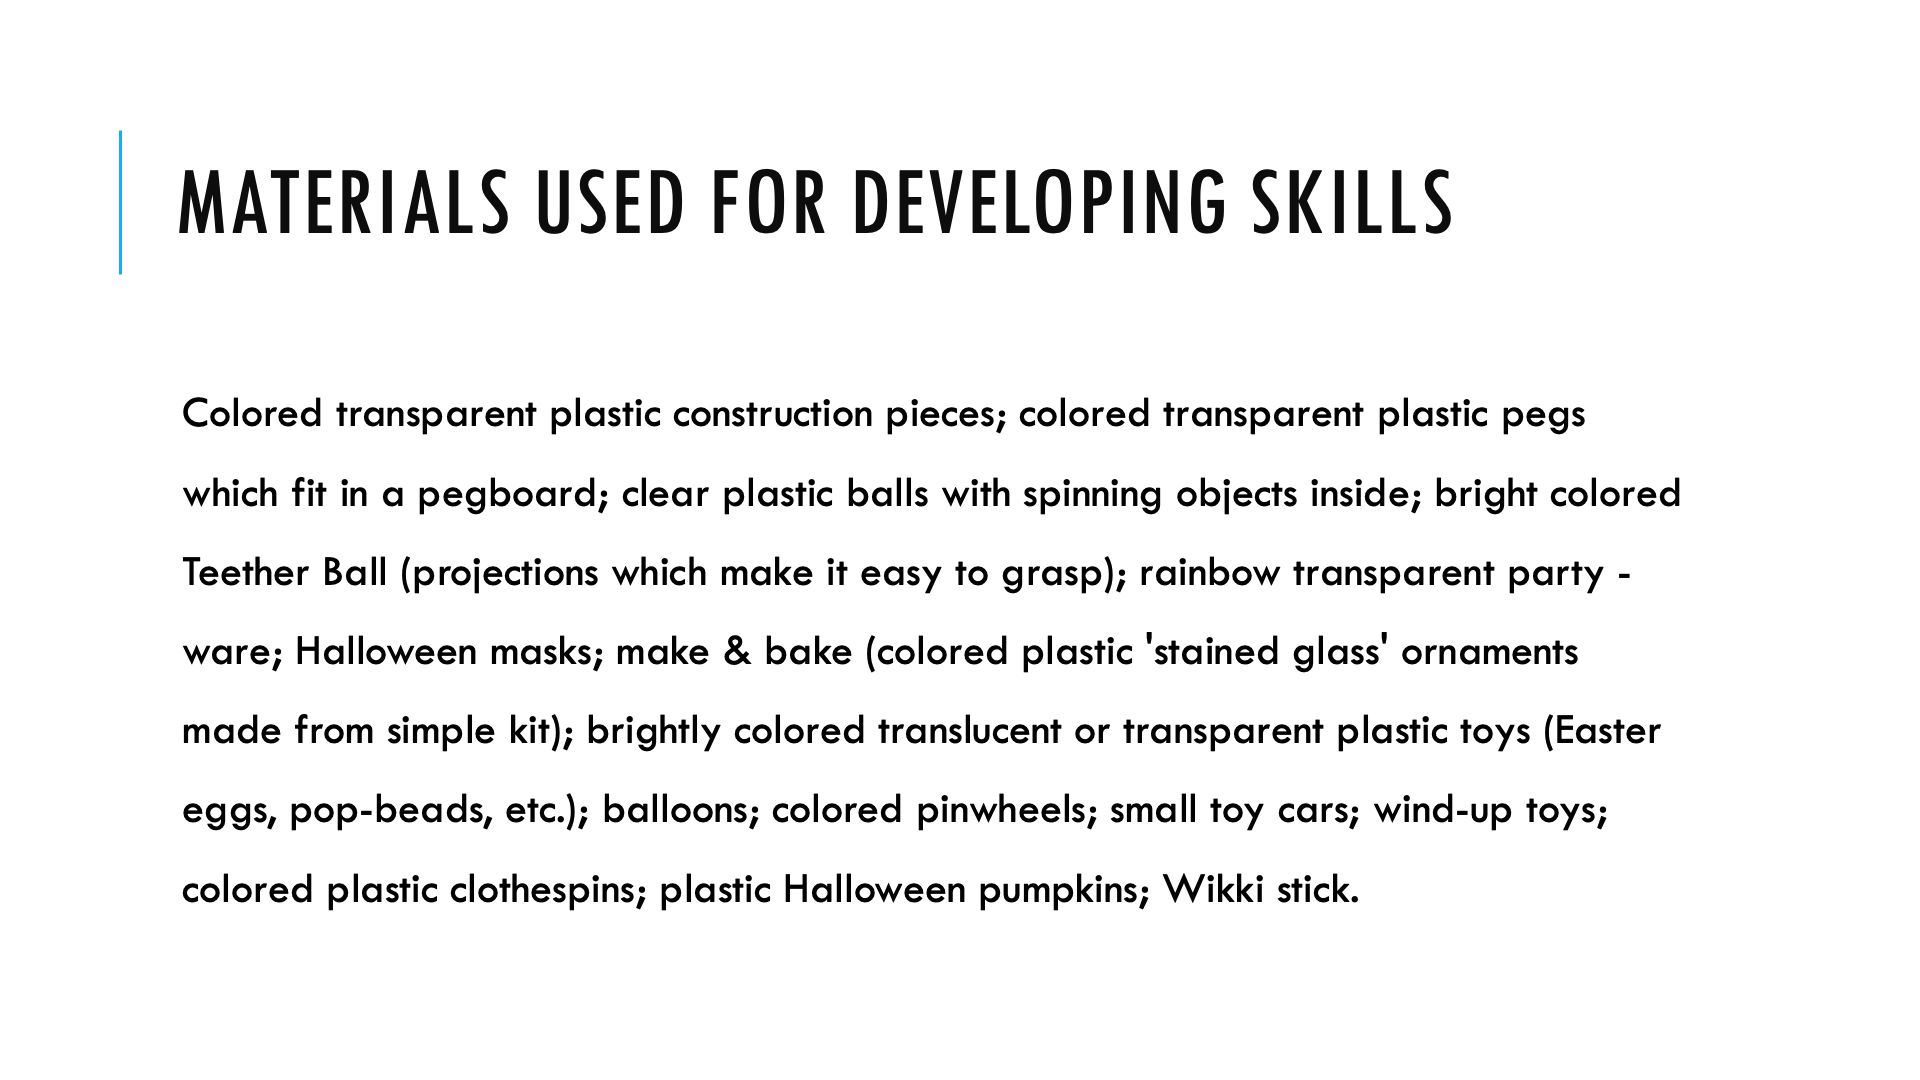 Materials used for developing skills